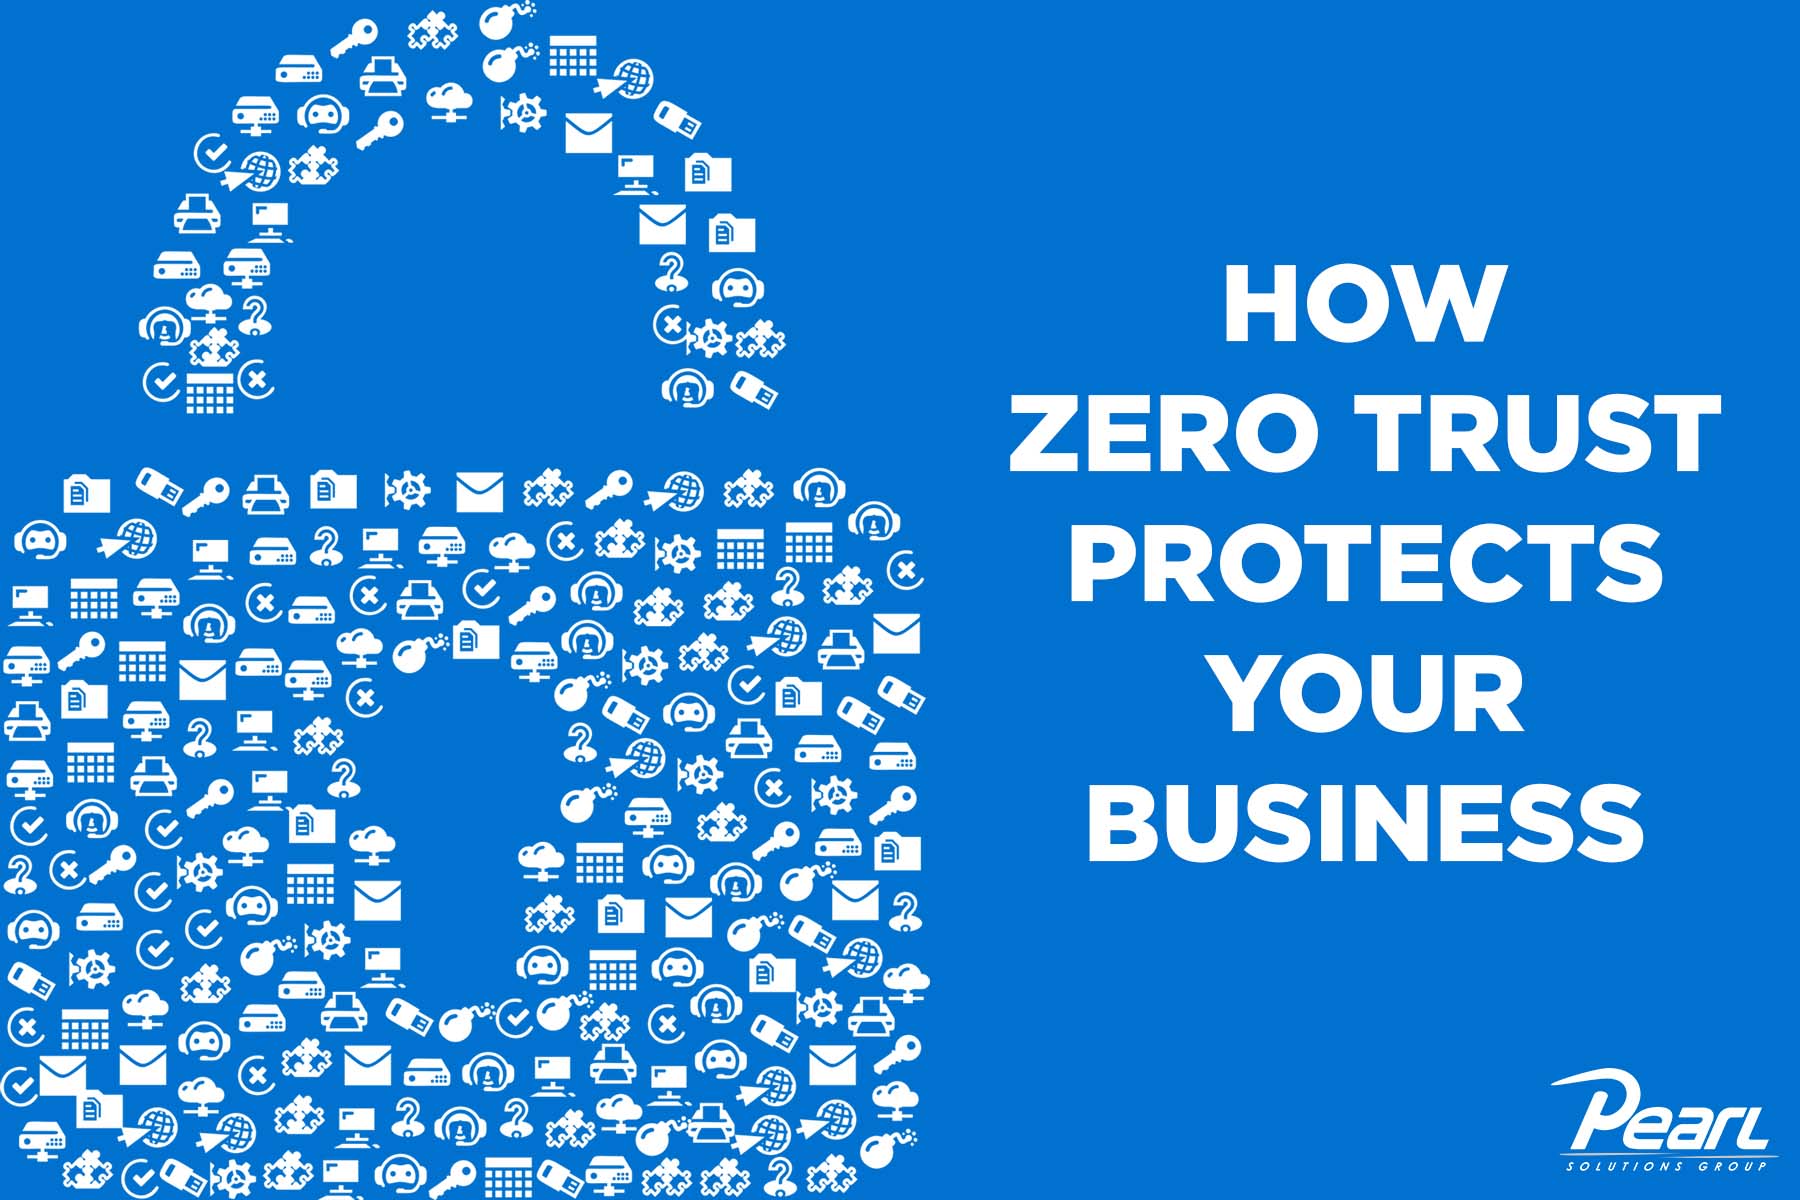 How Zero Trust Protects Your Business